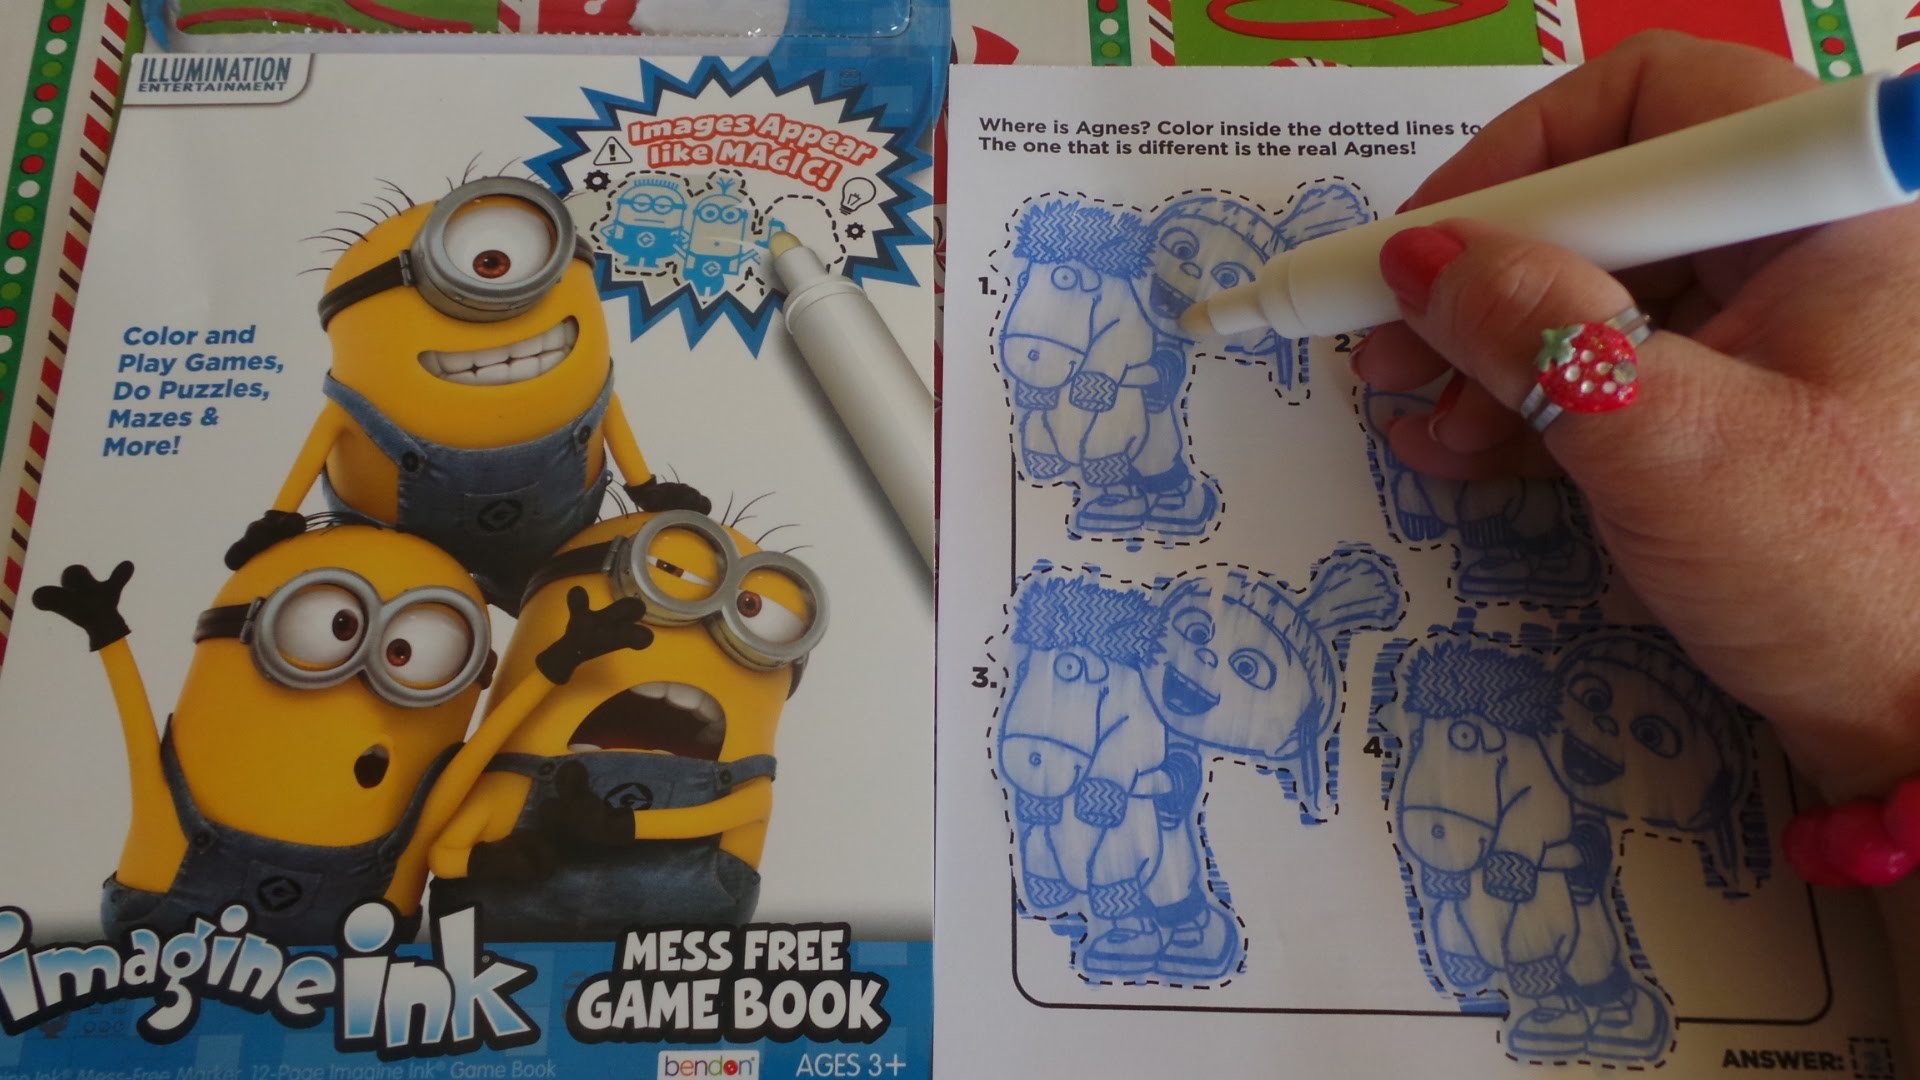 1920x1080 More Despicable Me Minions Imagine Ink Mess Free Game Book Fun - YouTube